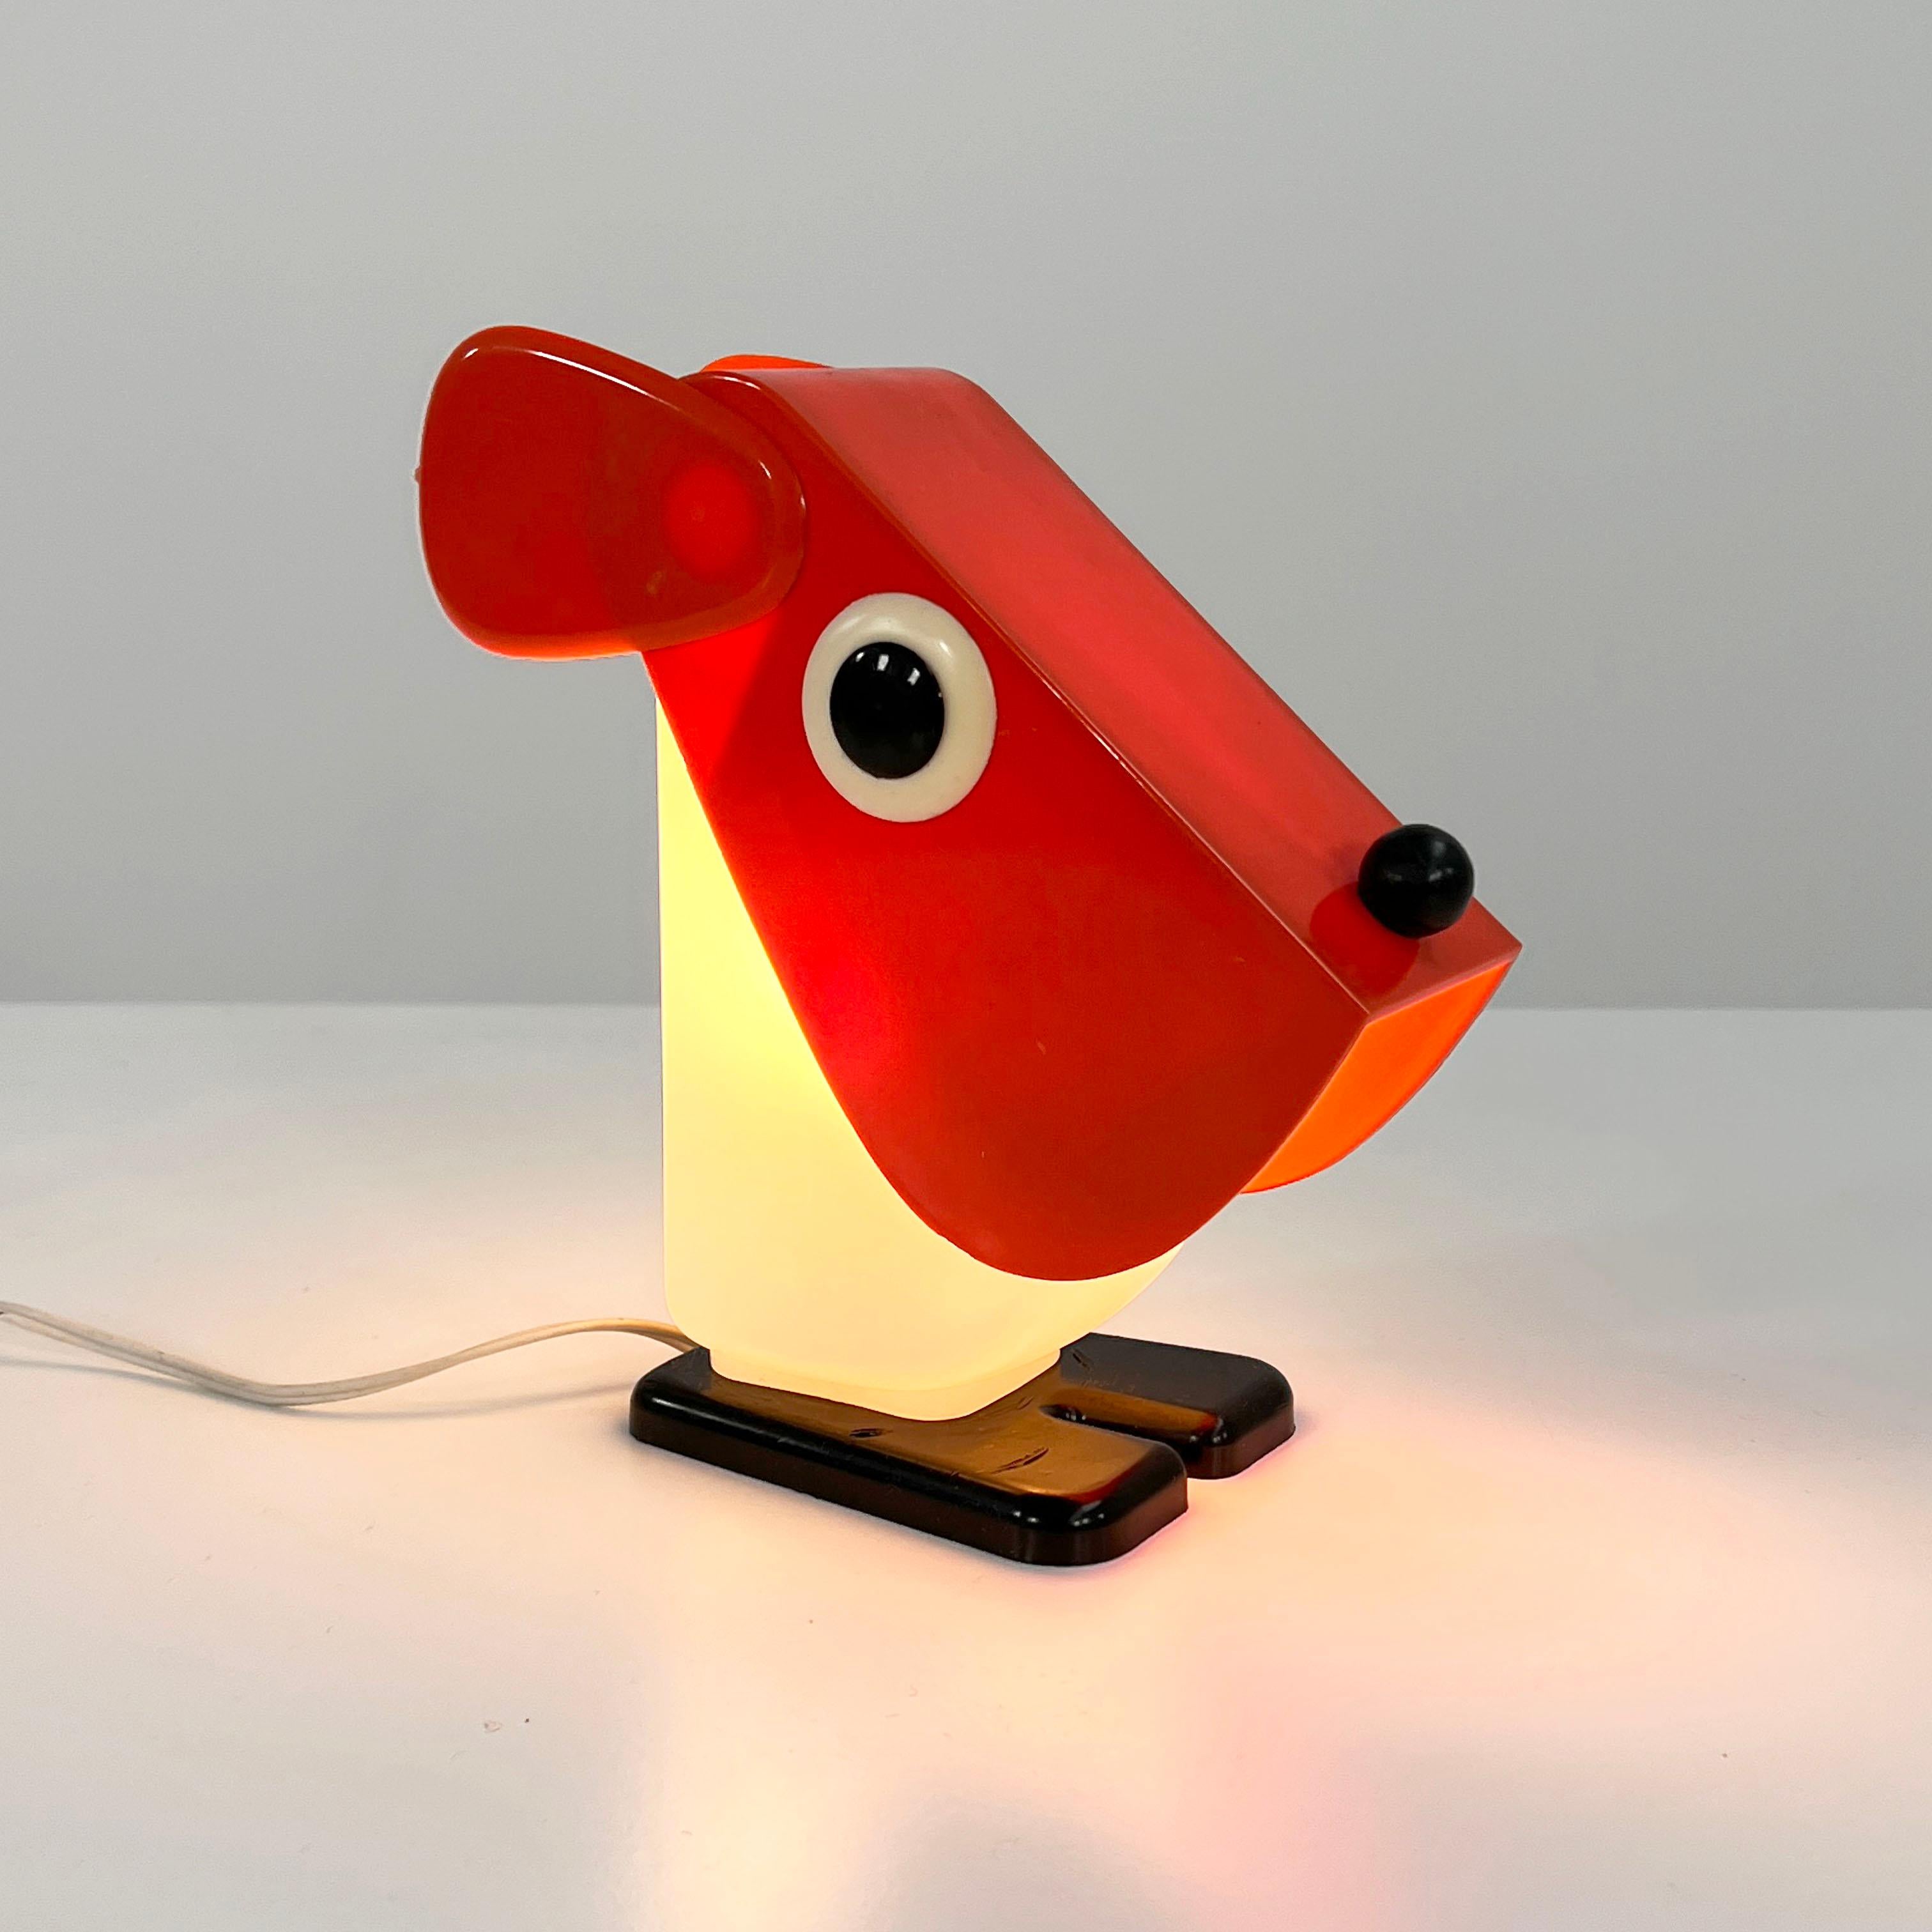 Designer - Fernando Cassetta 
Producer - Tacman
Model - Dog Table Lamp 
Design Period - Seventies
Measurements - Width 8 cm x Depth 18 cm x Height 20 cm
Materials - Plastic, Glass
Color - White, Red, Black
Light wear consistent with age and